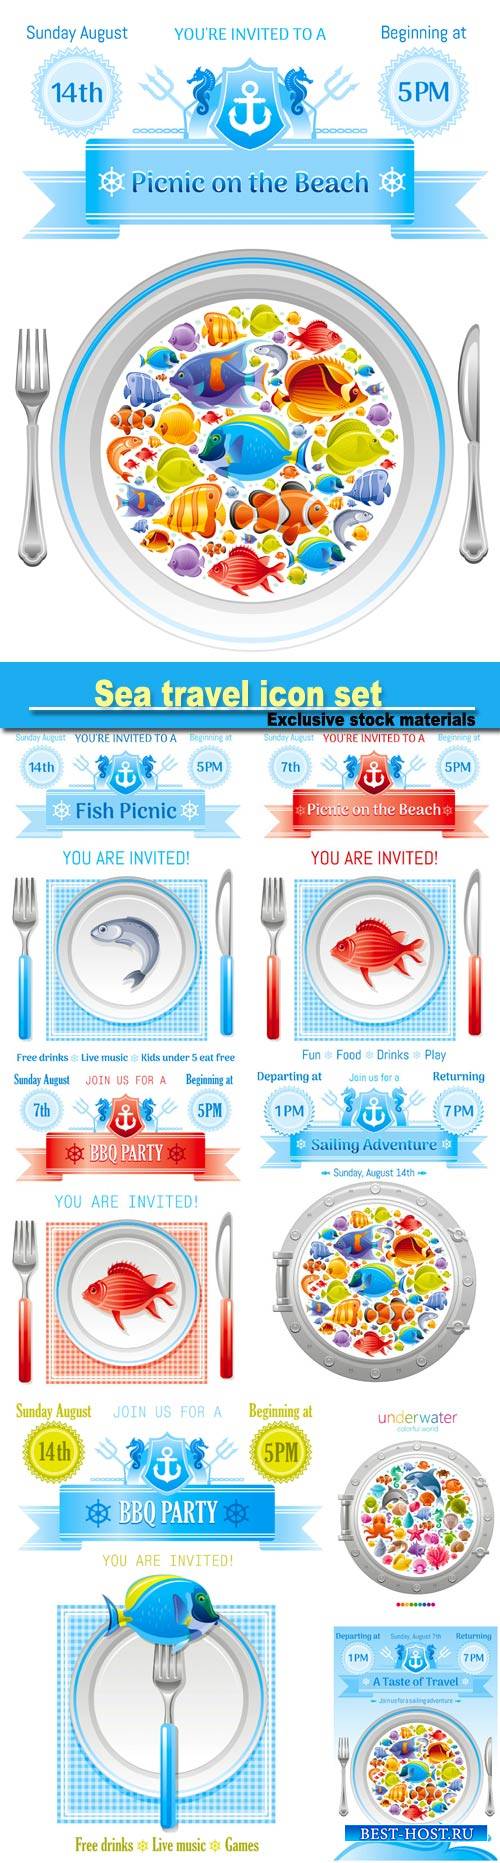 Sea travel icon set with underwater diving animals, dolphin, killer whale, starfish, coral, oyster pearl